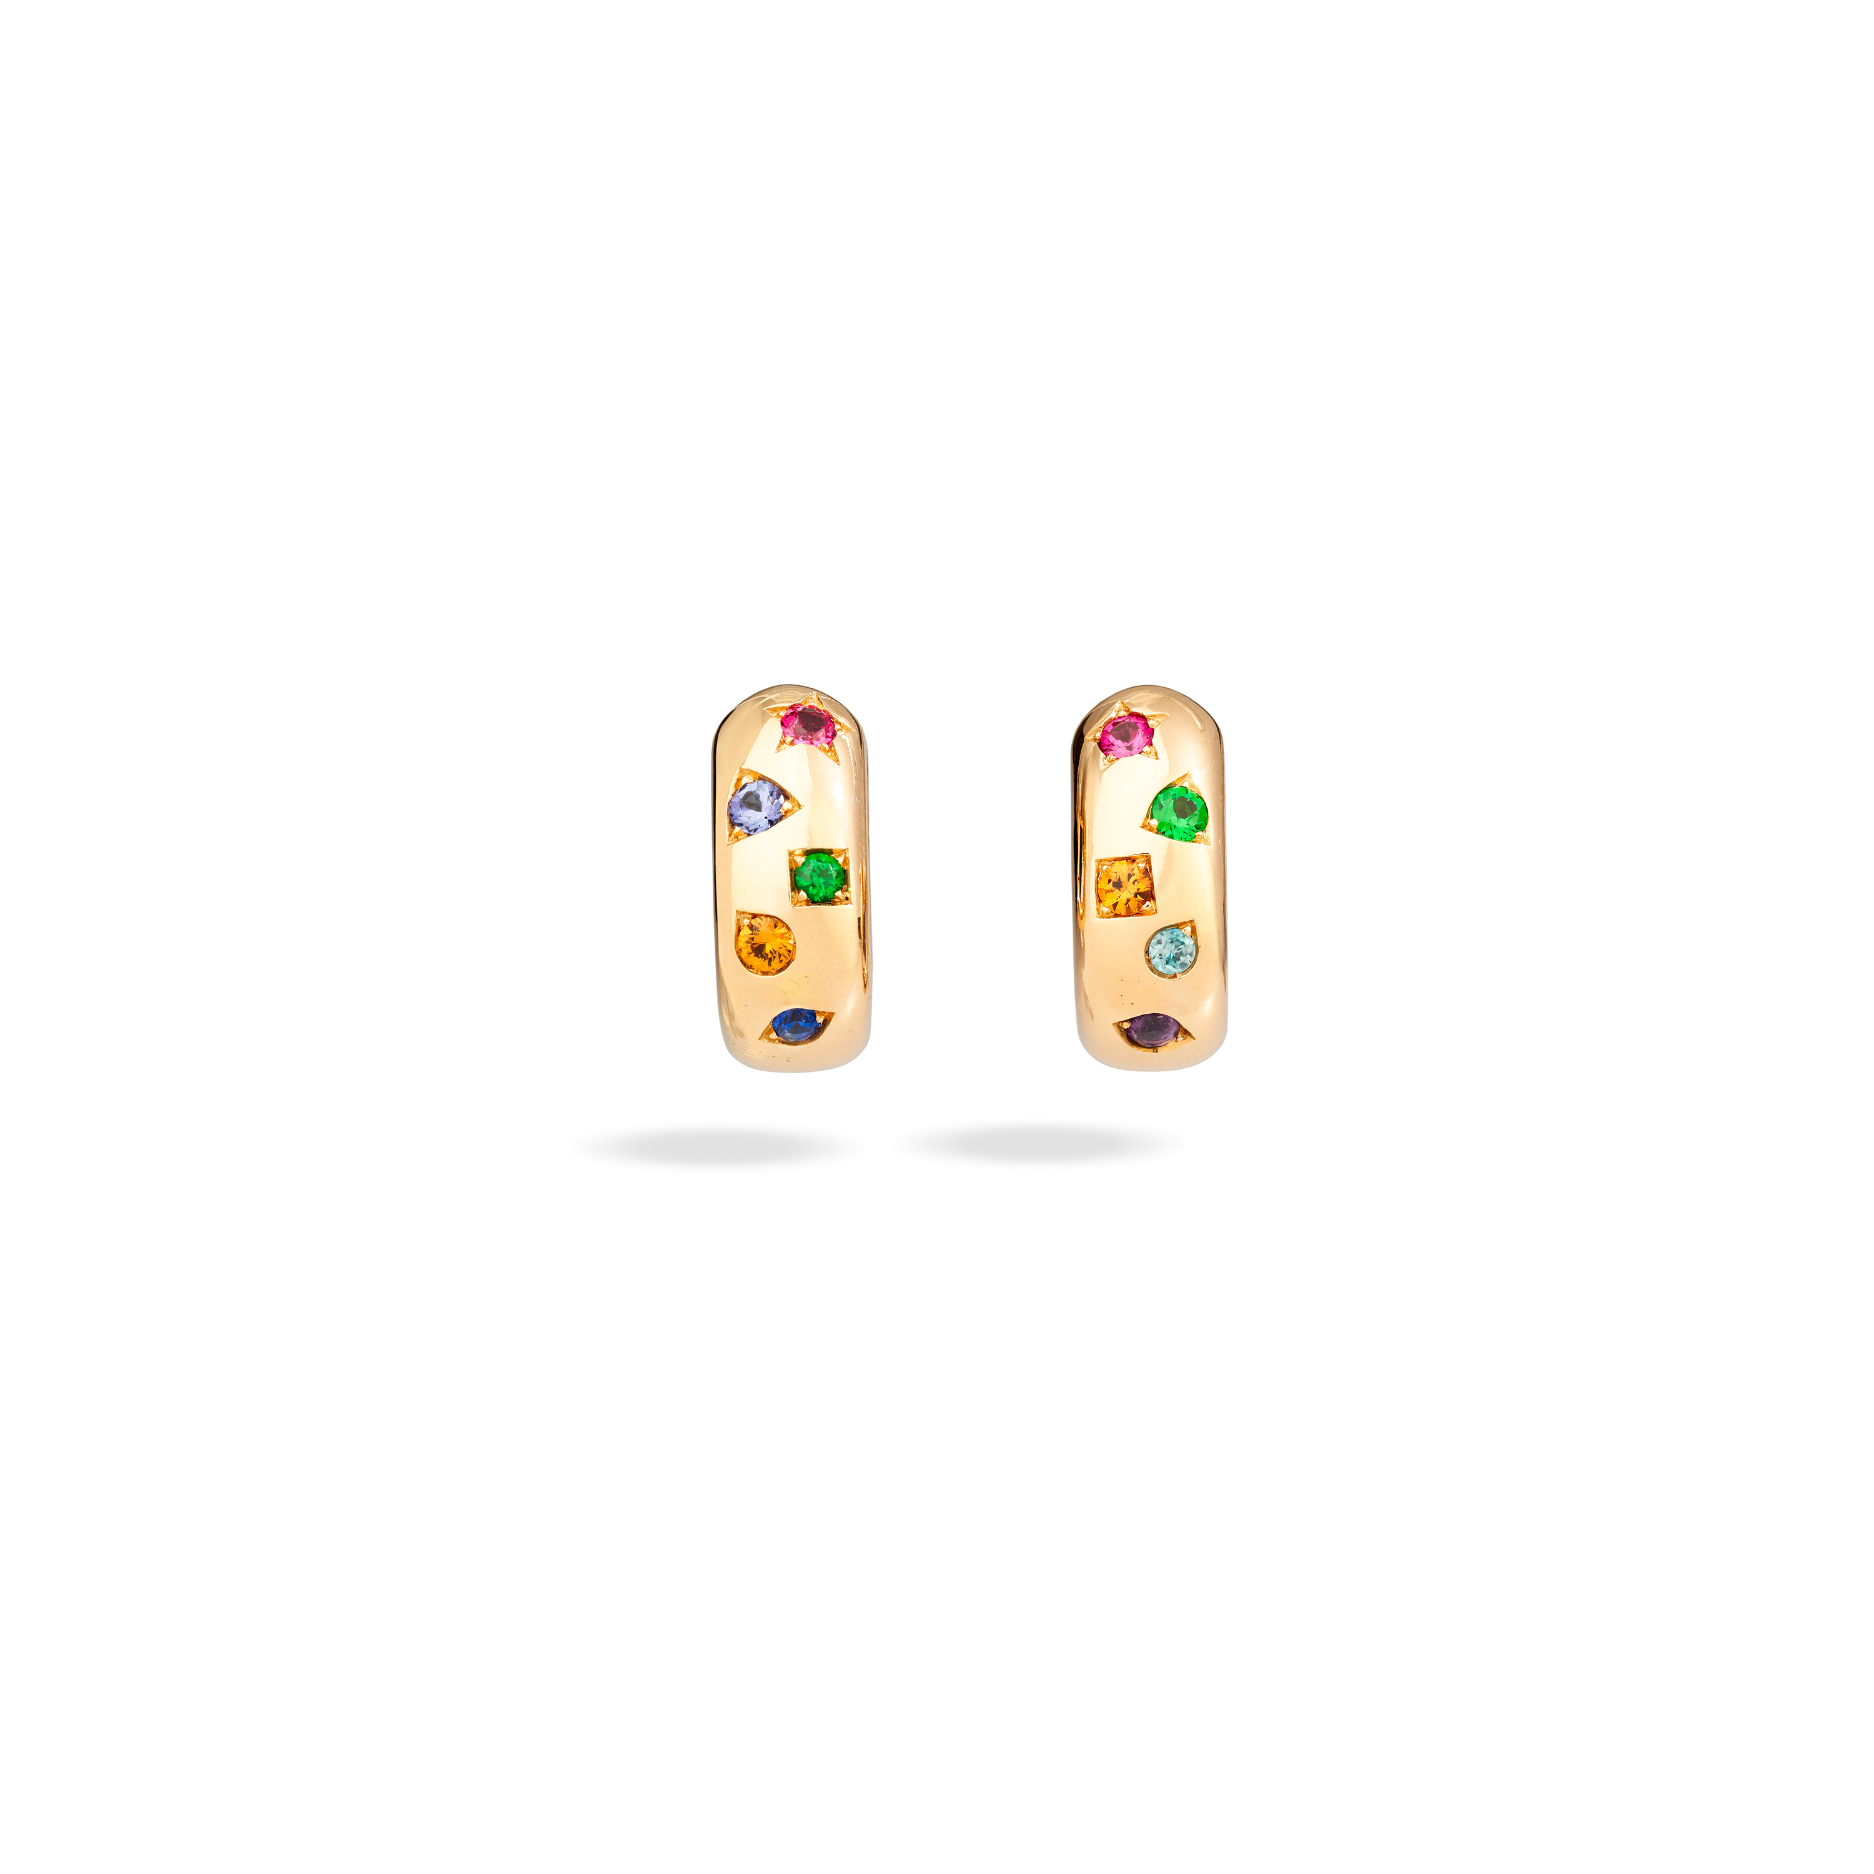 Pomellato Iconica Earrings in 18k Rose Gold with Coloured Gemstones - Orsini Jewellers NZ